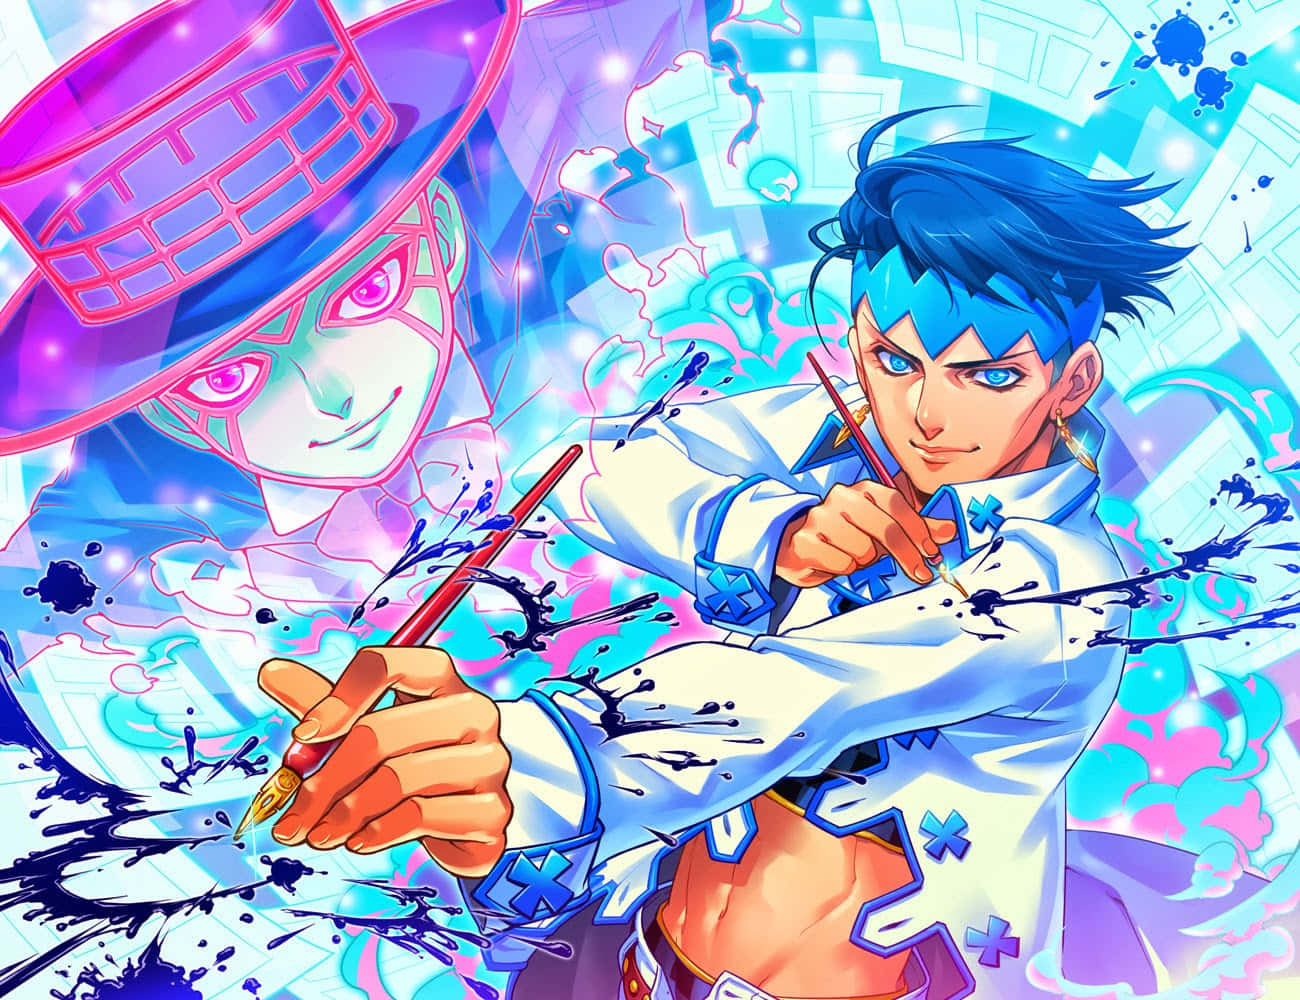 Rohan Kishibe posing confidently in his signature outfit Wallpaper